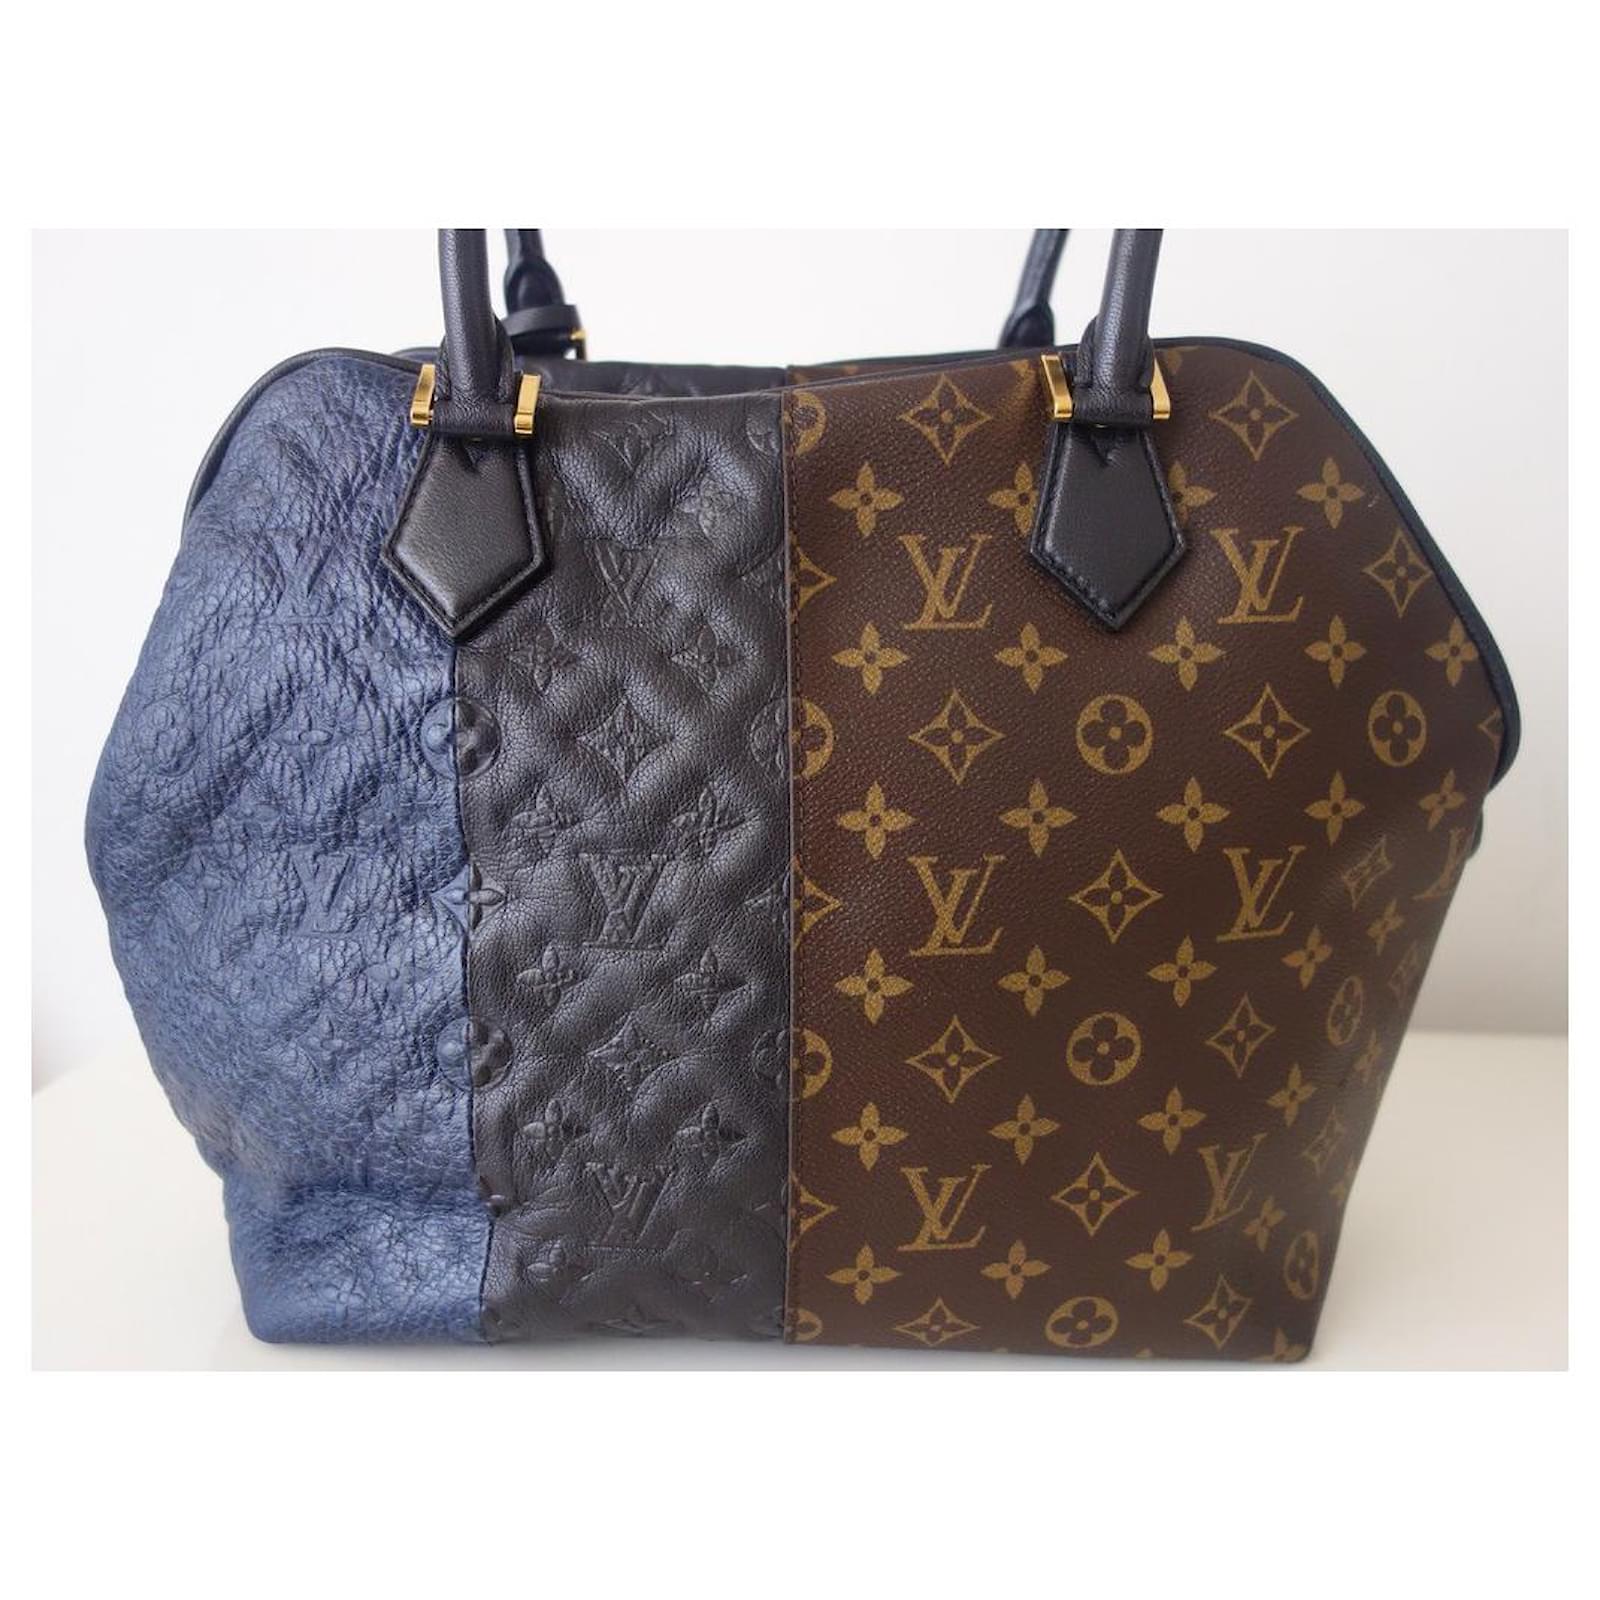 Woman with Louis Vuitton bag in brown and blue colors before